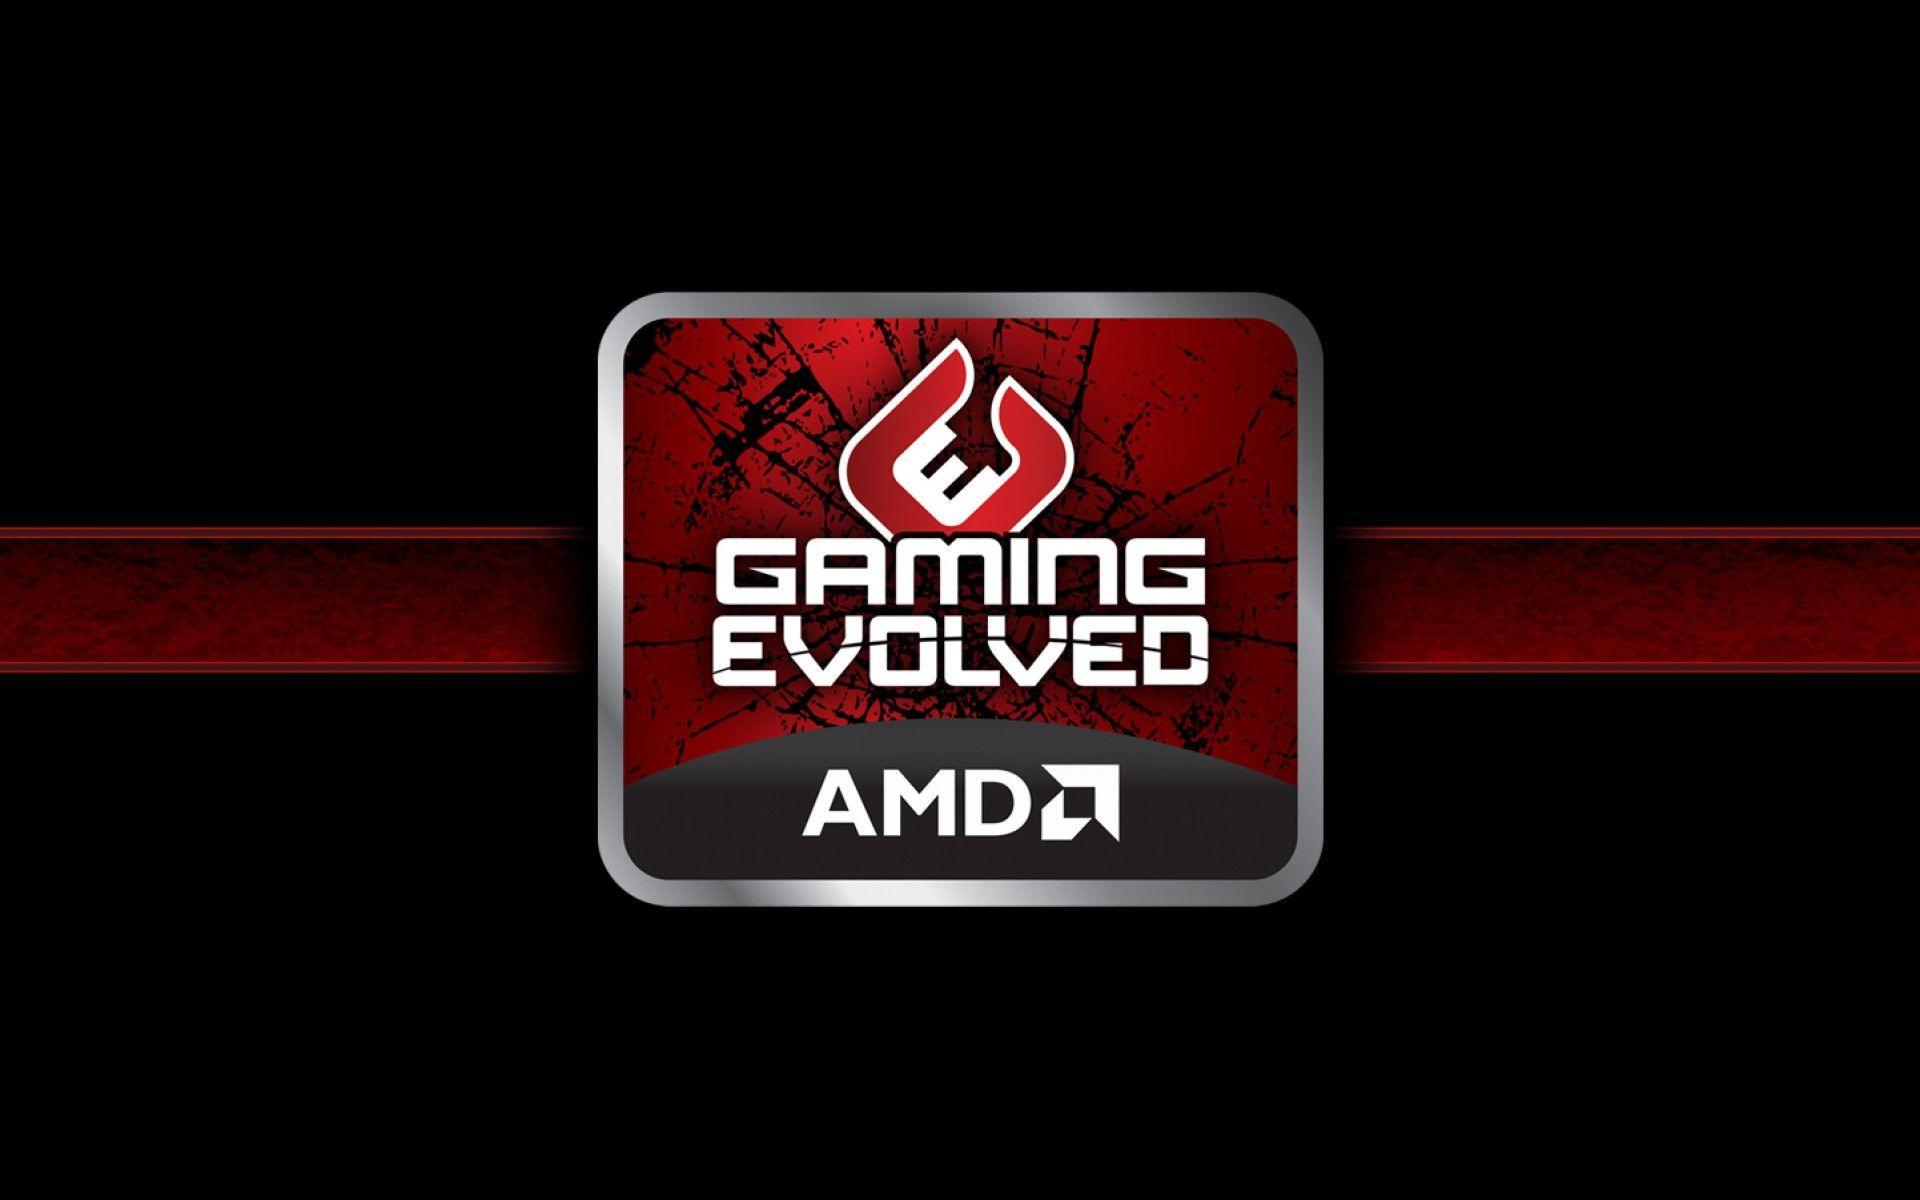 Download wallpapers AMD purple logo, 4k, purple brickwall, AMD logo,  brands, AMD neon logo, AMD for desktop with resolution 3840x2400. High  Quality HD pictures wallpapers